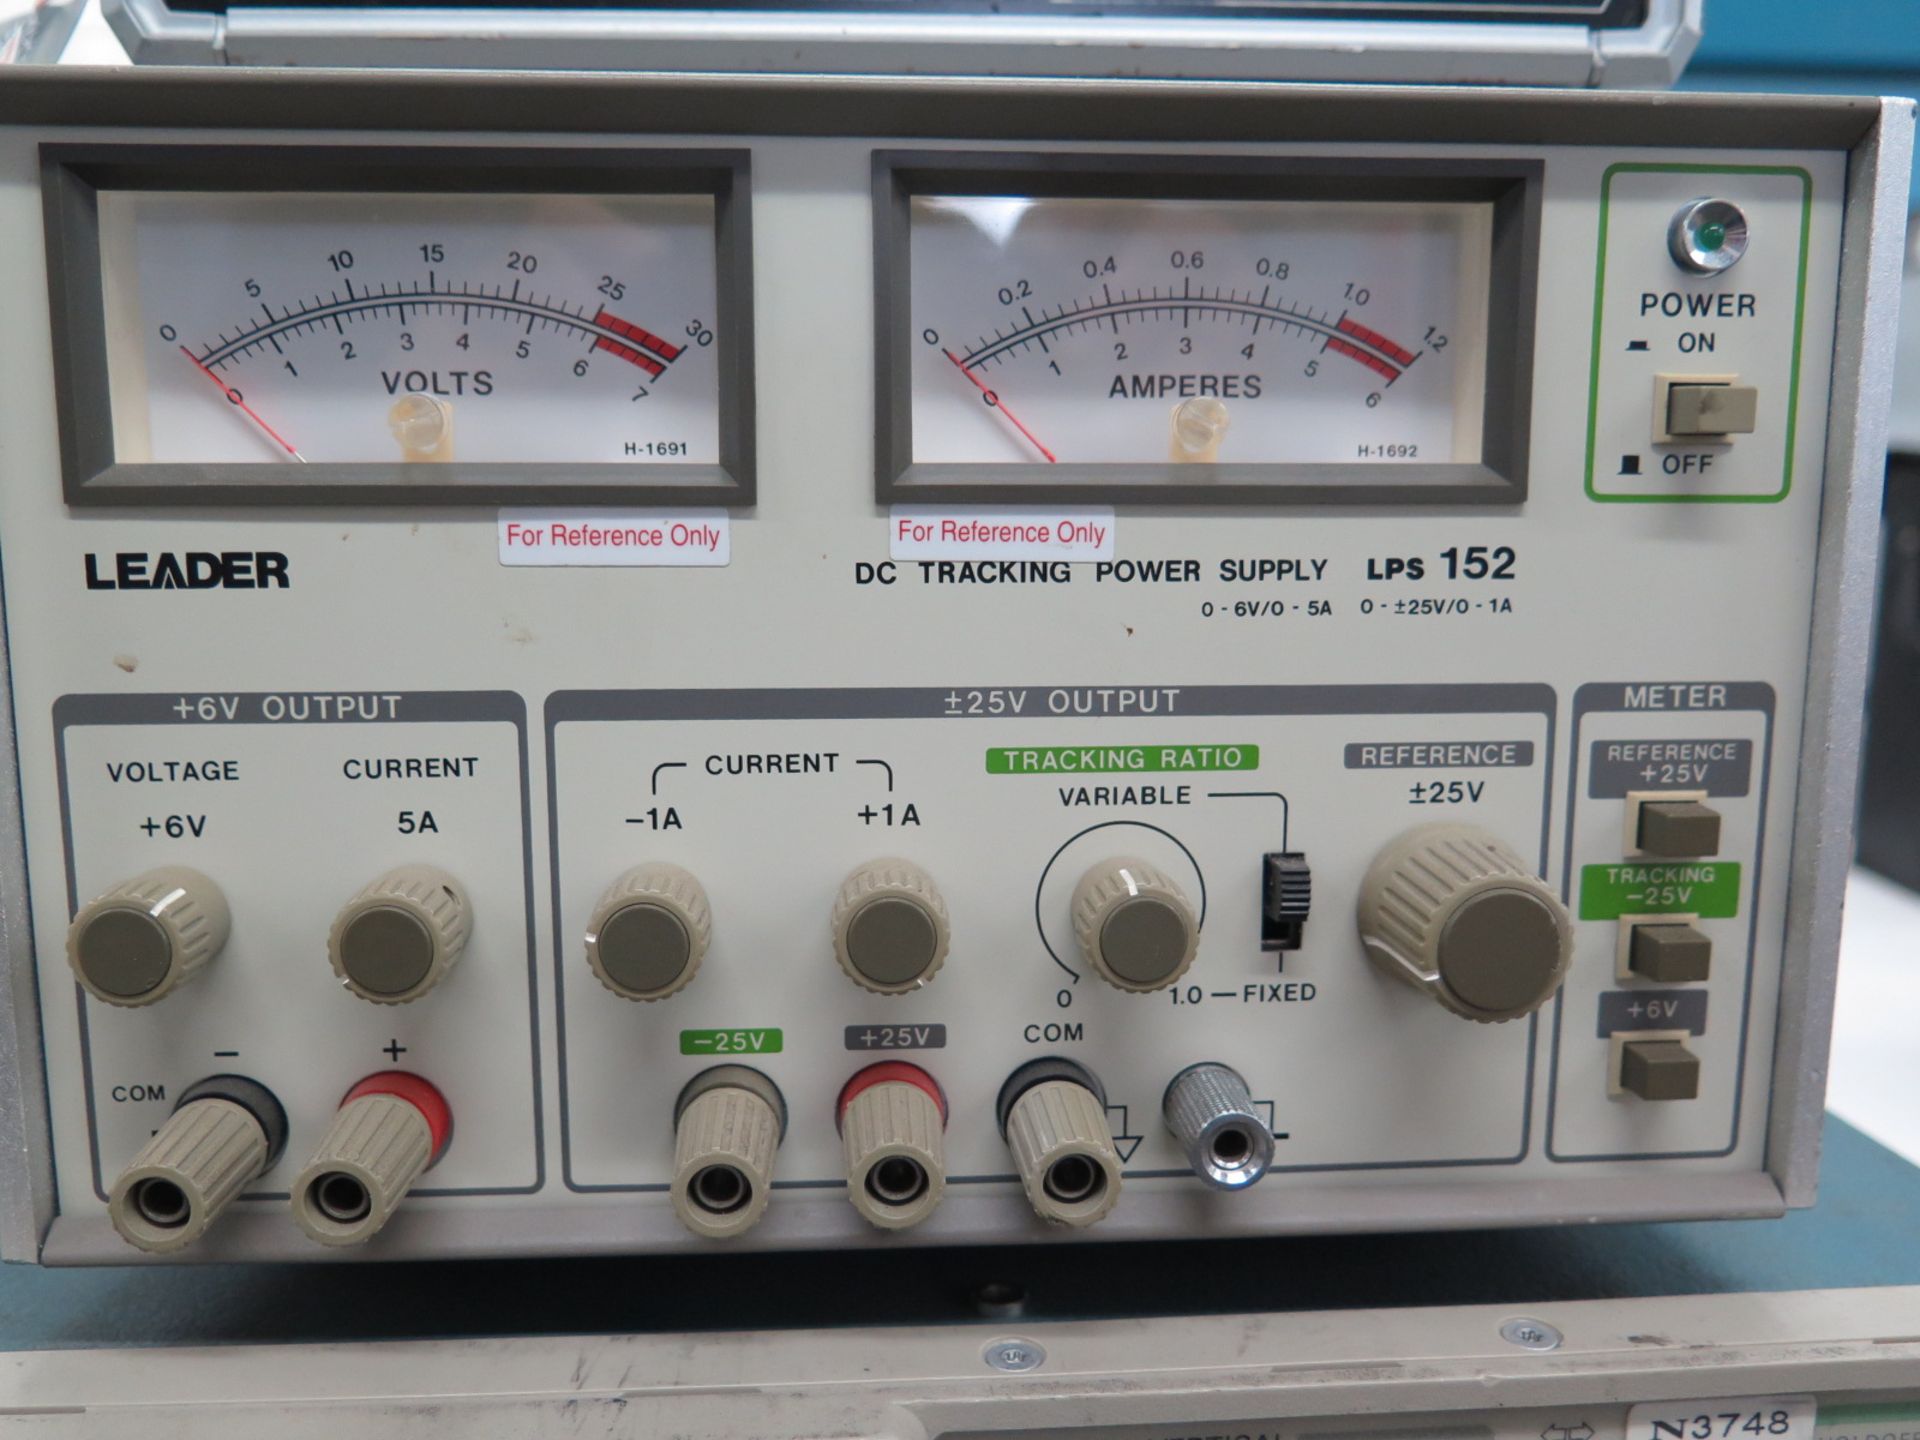 Tektronix mdl. 2465 300MHz Oscilloscope, Leader mdl. LPS152 DC Tracking Power Supply, Fluke mdl. A90 - Image 4 of 6